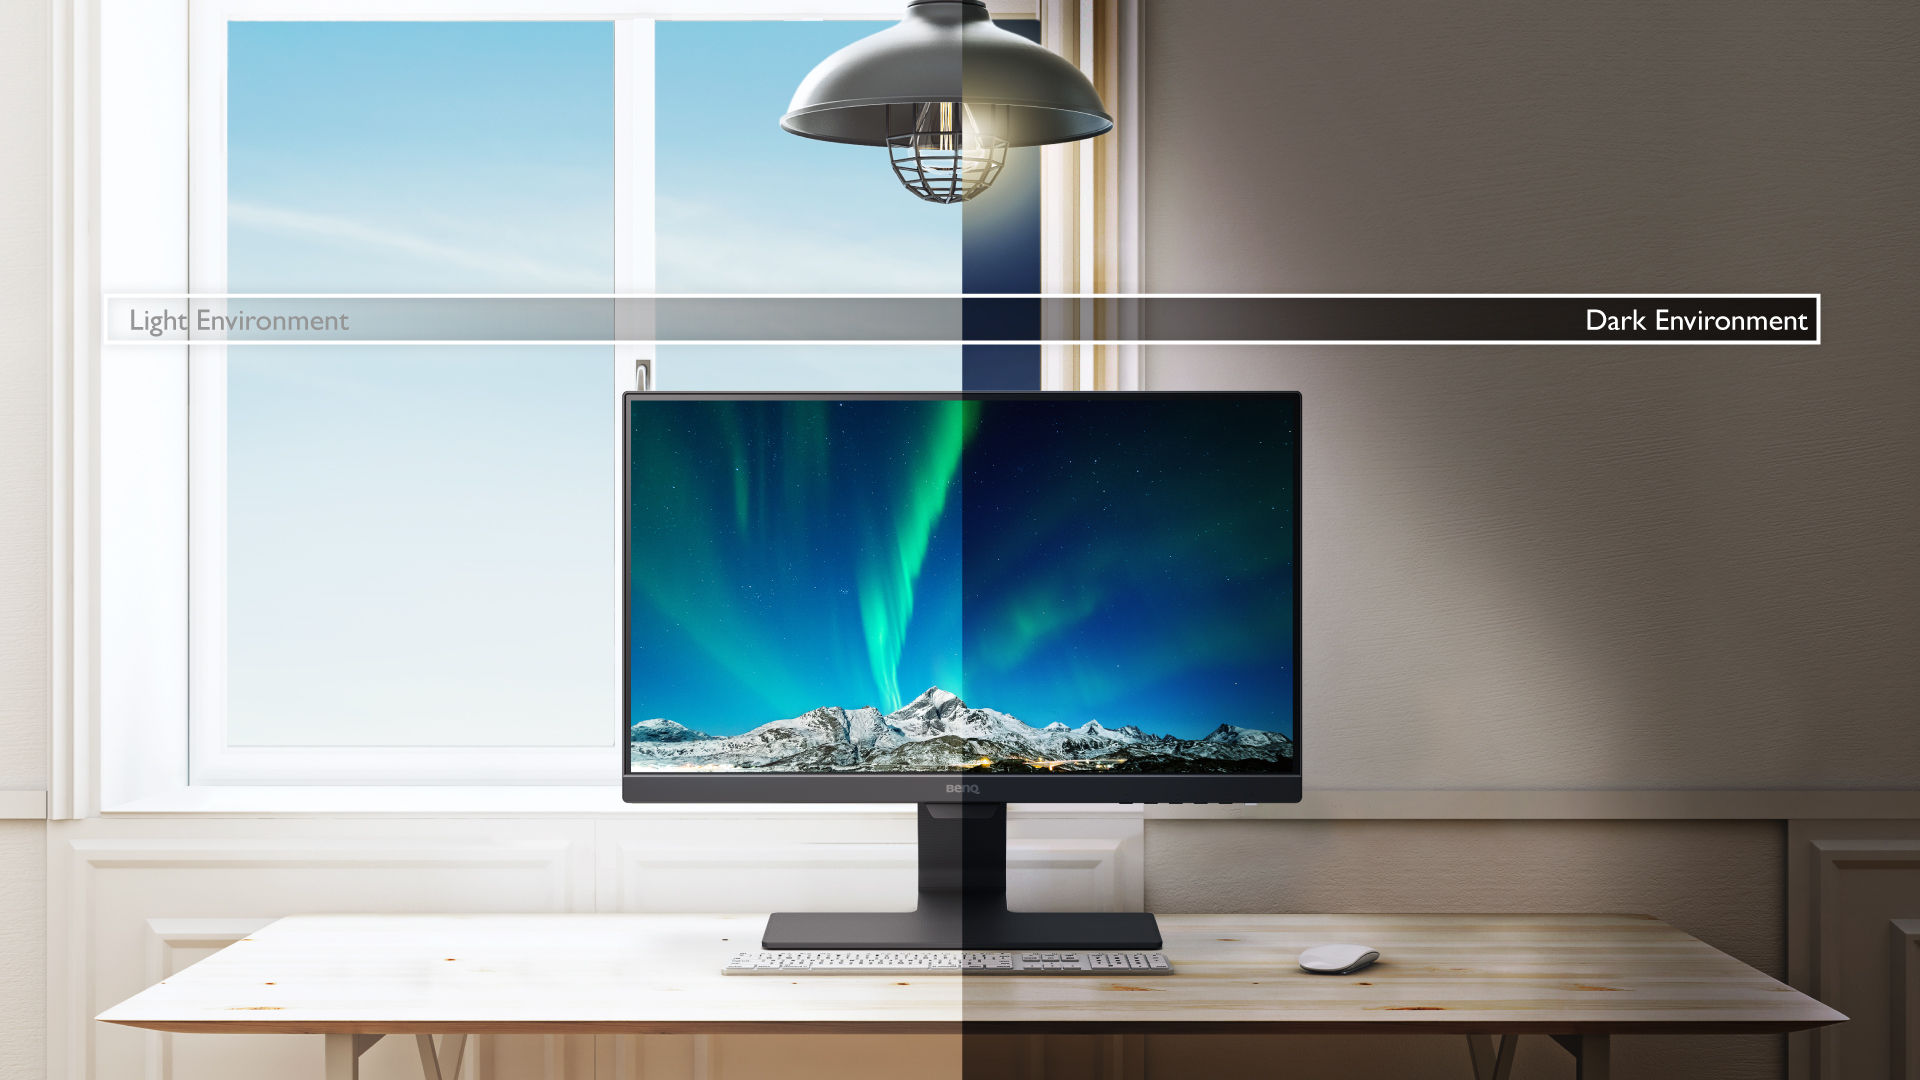 benq gw2280 b.i. sensor detects ambient light brightness and contrast of screen content and actively adjusts screen brightness for the most comfortable viewing